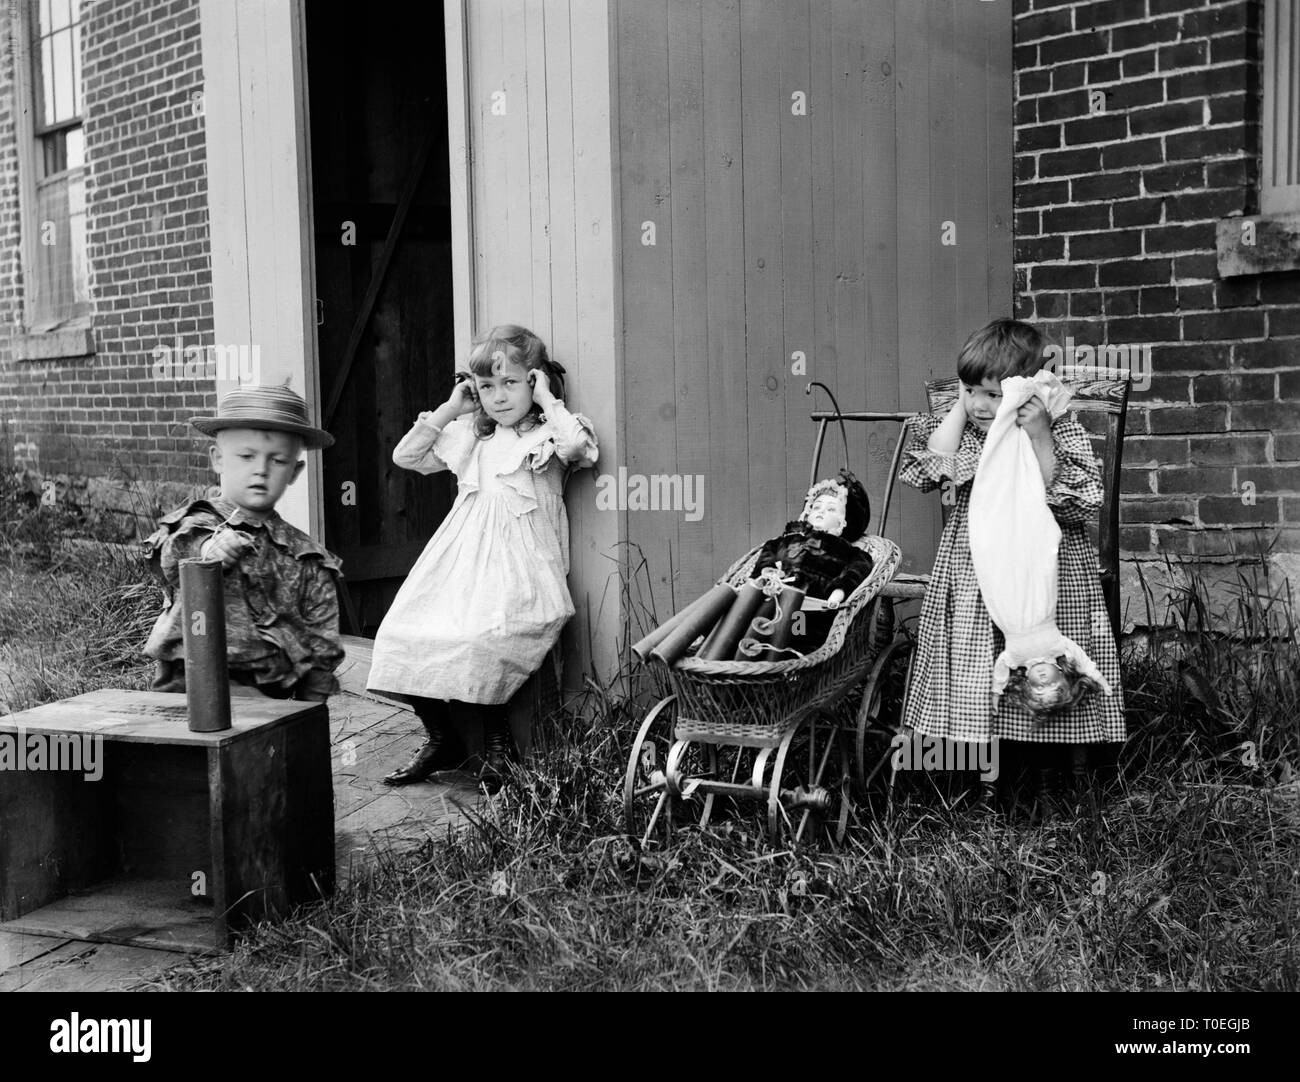 In an apparent set up comic photo, the children prepare to set off some dynamite for some good, clean fun, ca. 1900 Stock Photo